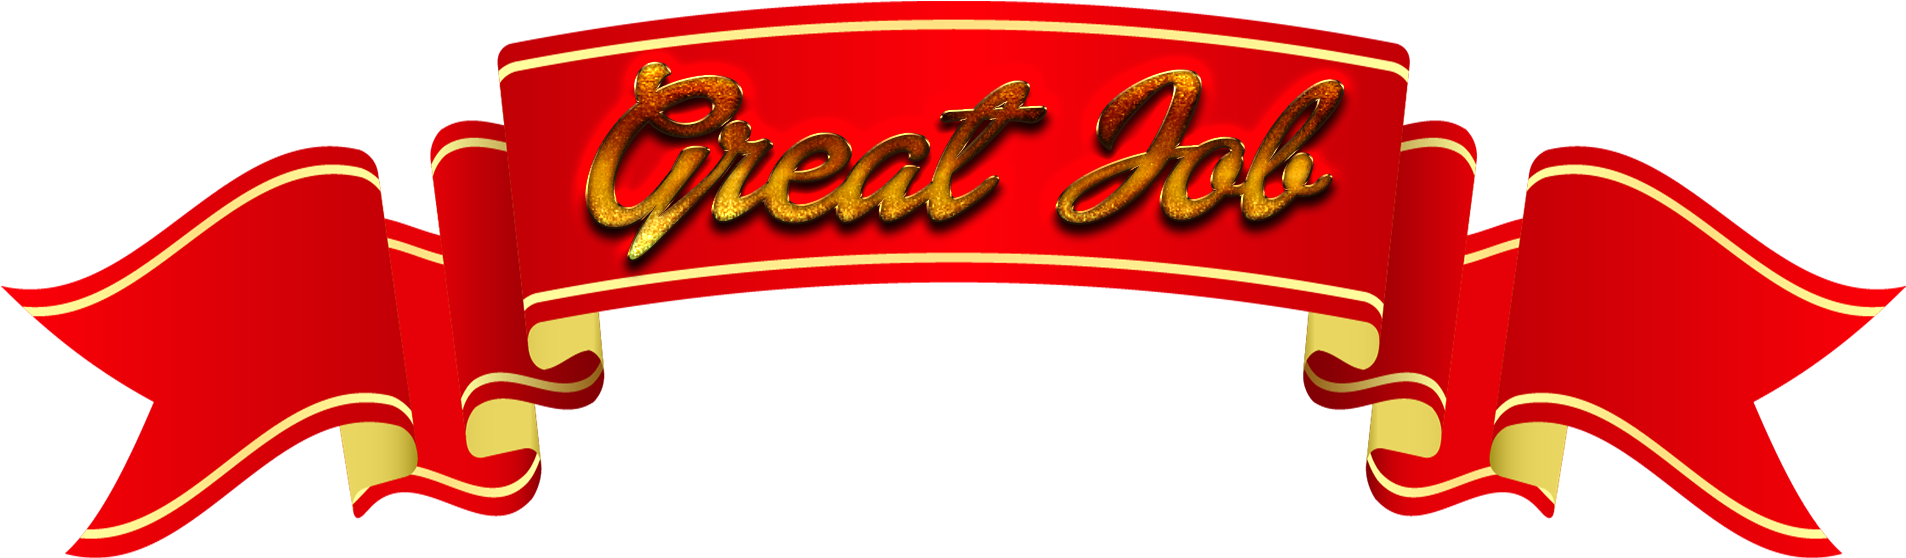 A Red Sign With Gold Text